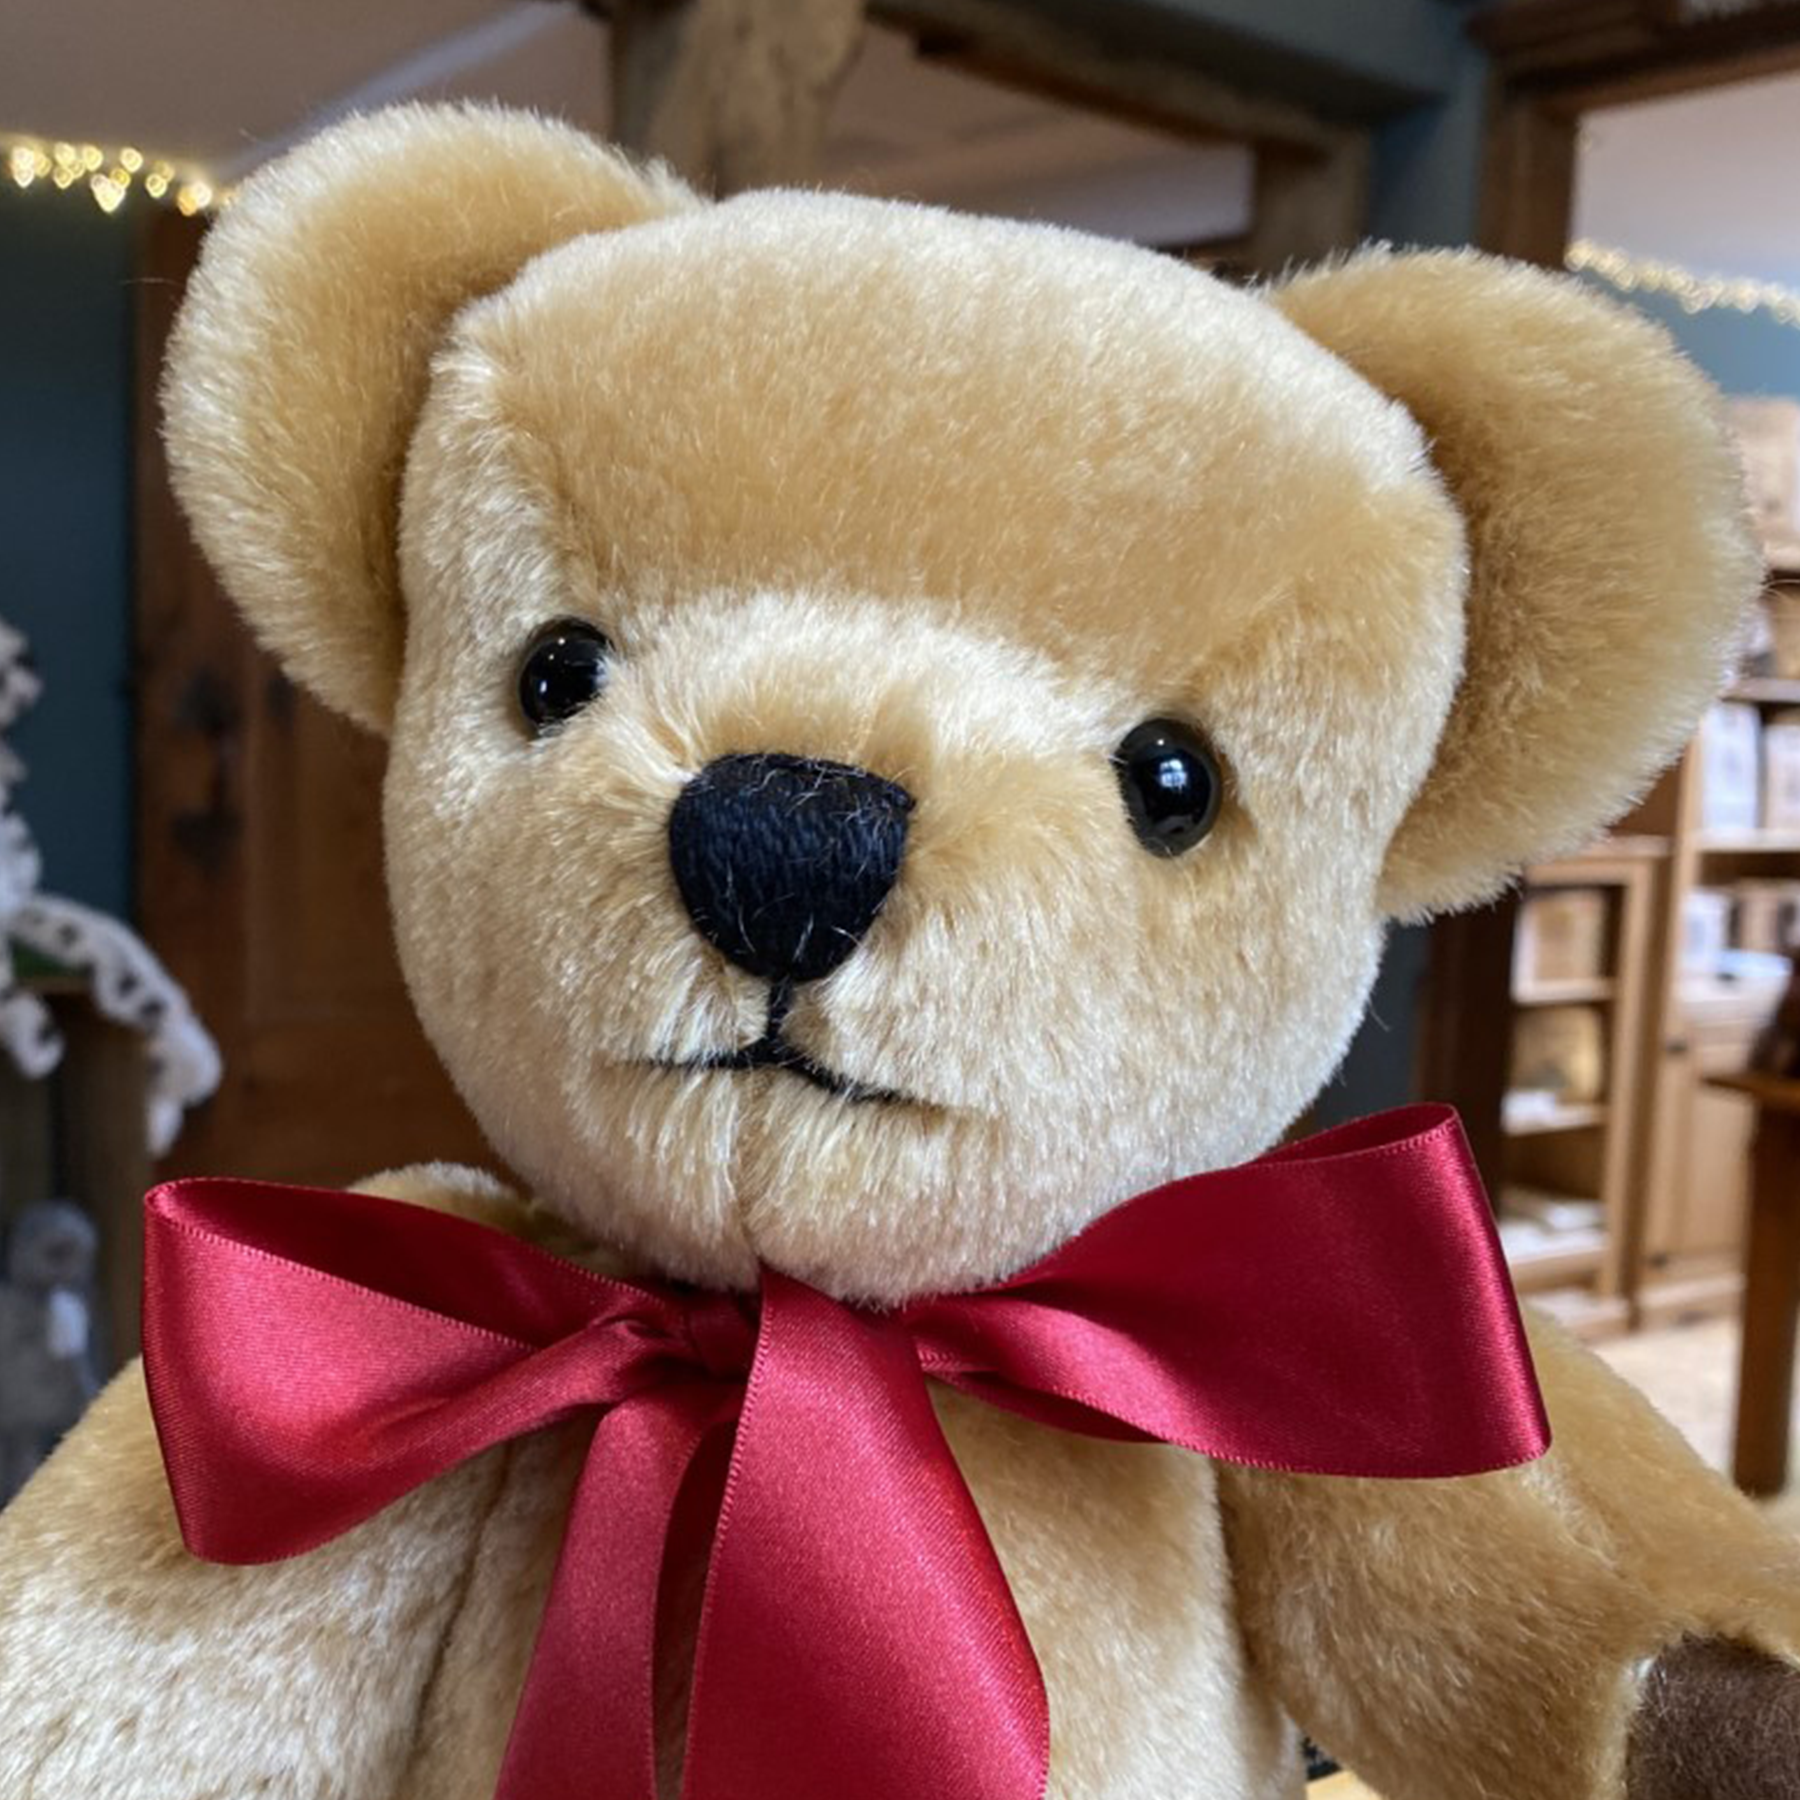 London Gold is an iconic Merrythought character, and the ultimate first teddy bear to be treasured for years to come. Expertly hand-crafted from velvety soft golden mohair, with milk chocolate wool felt paws, this bear is a true classic. A simple scarlet satin bow is the perfect accompaniment.